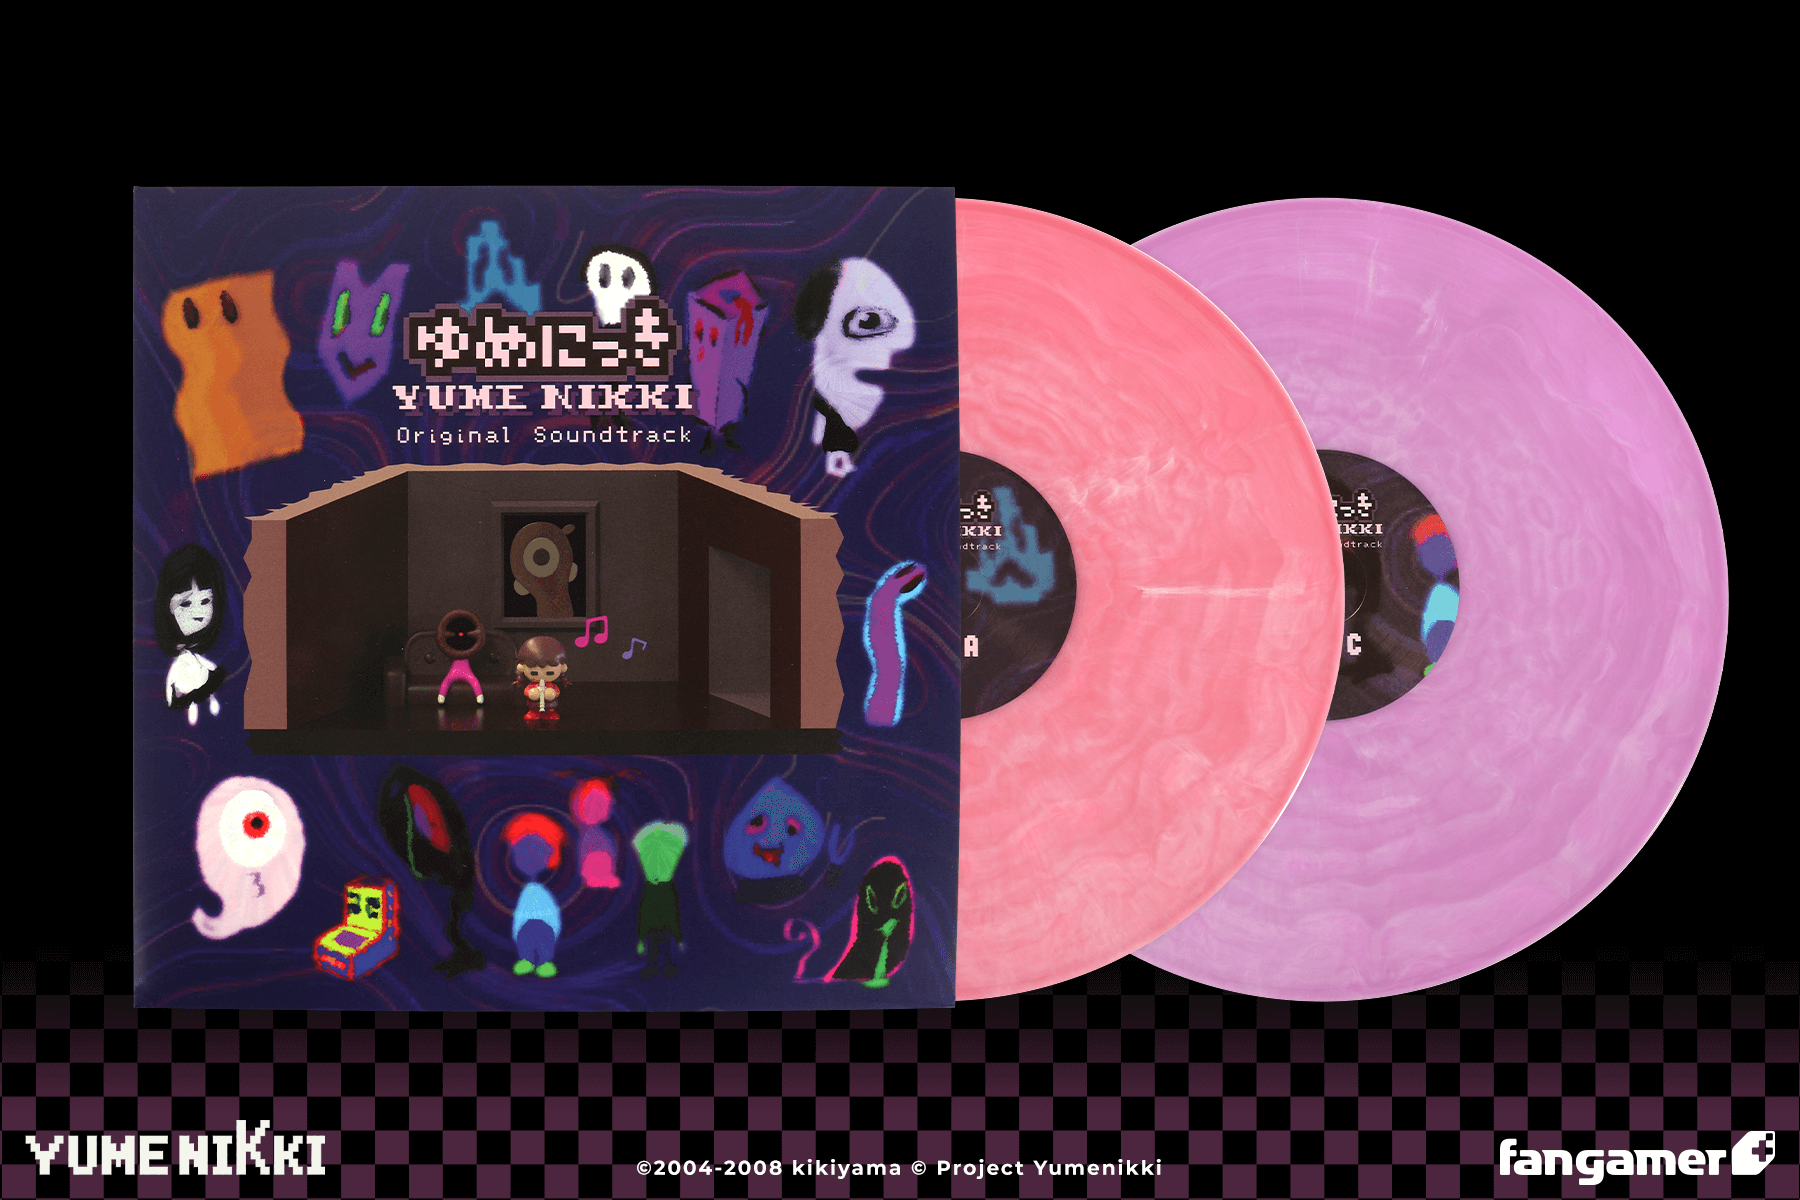 Neon White Will Be Getting Two New Vinyl Soundtrack Releases